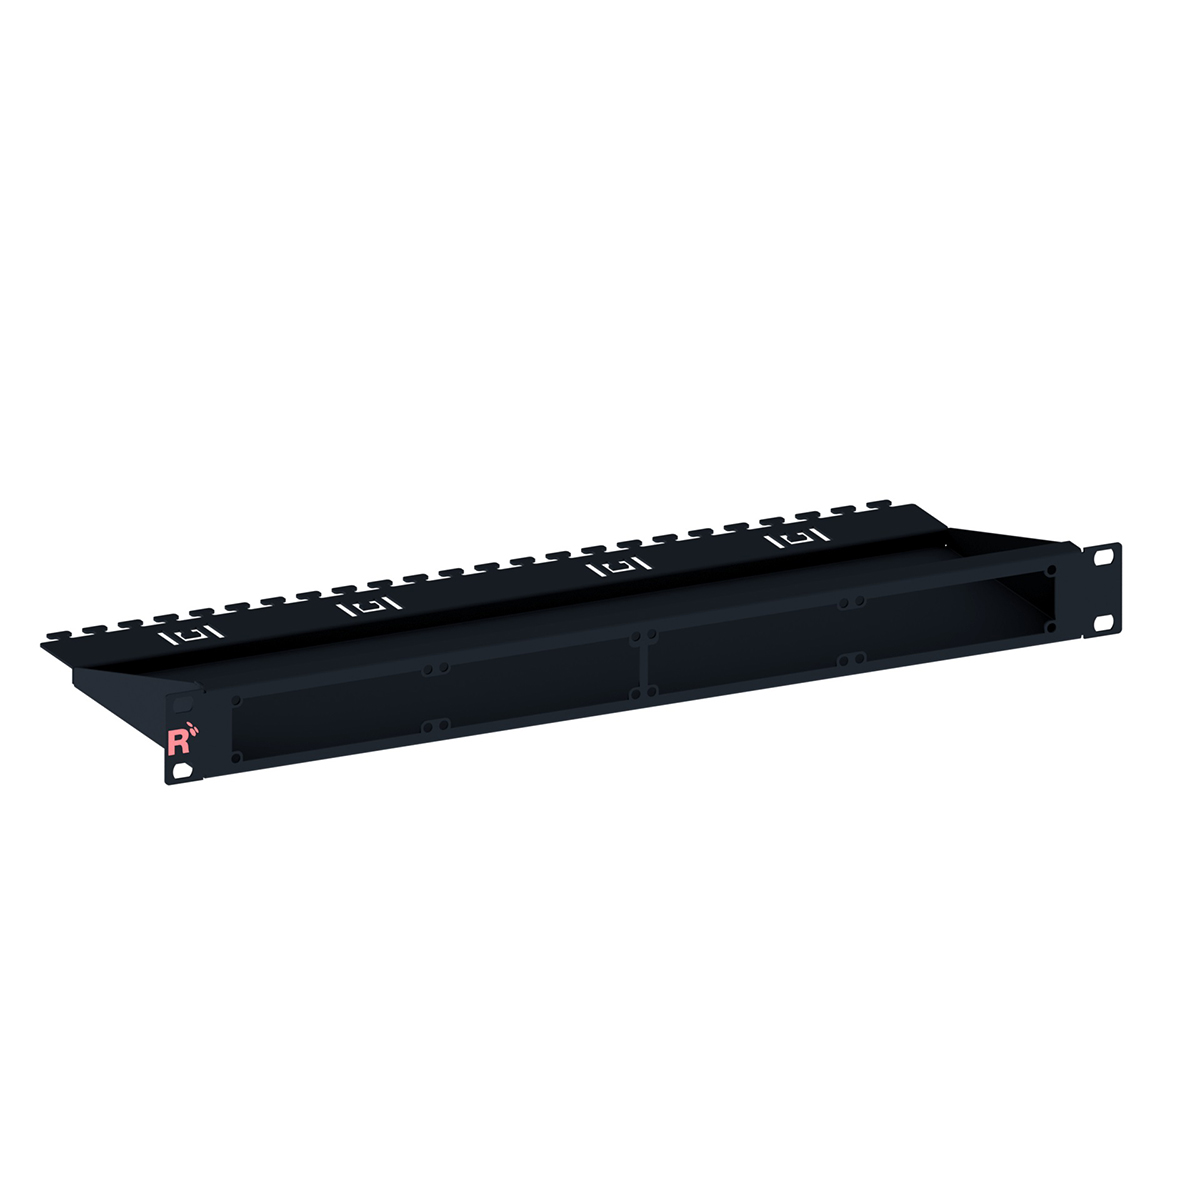 SMAP-G2 SD 19" open panel, RAL9005 black